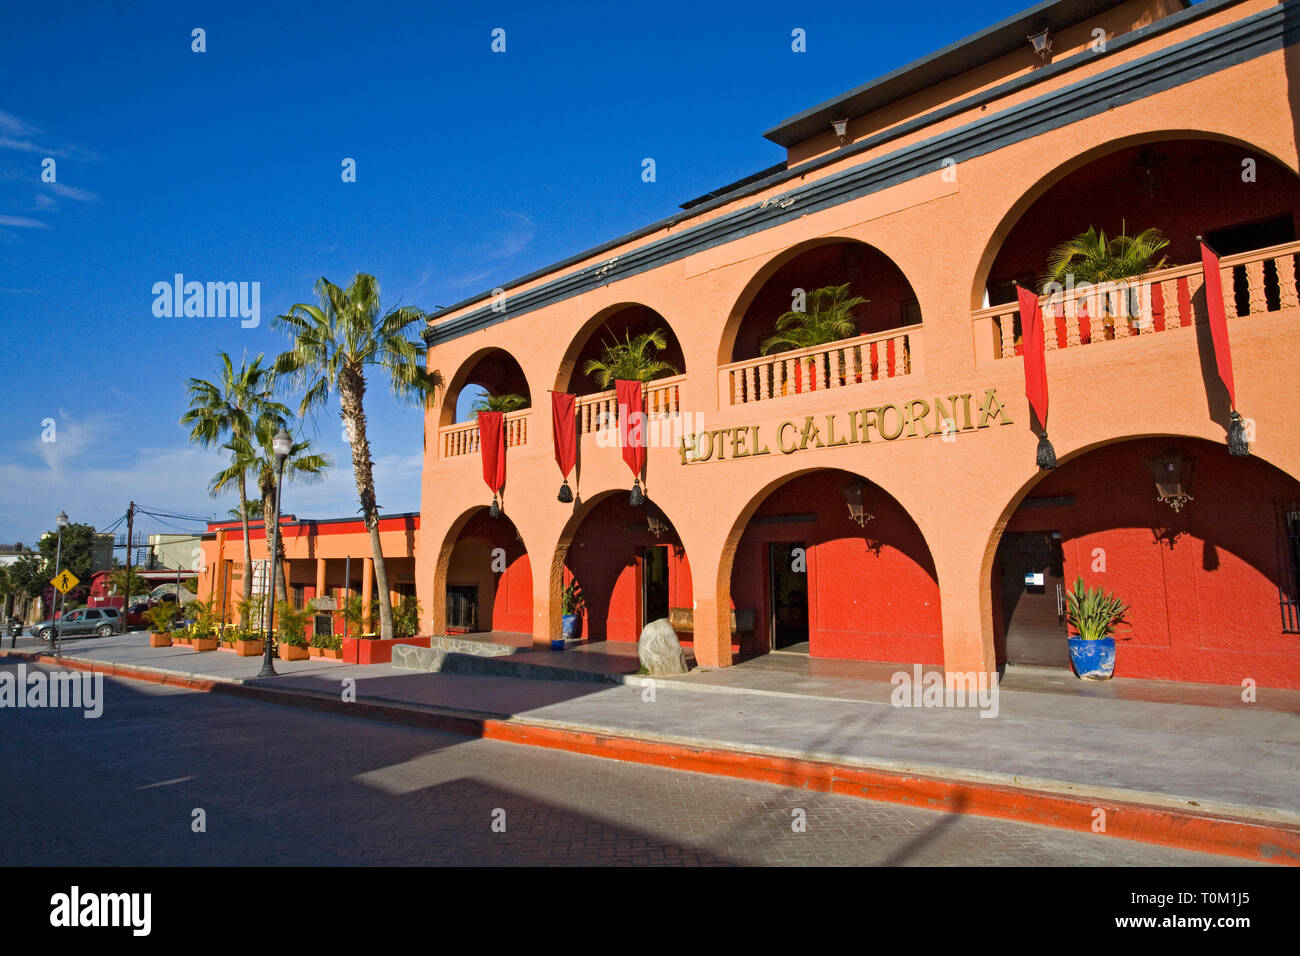 A front view of the famous Hotel California, in the small town of Todos Santos, in Baja, California Stock Photo